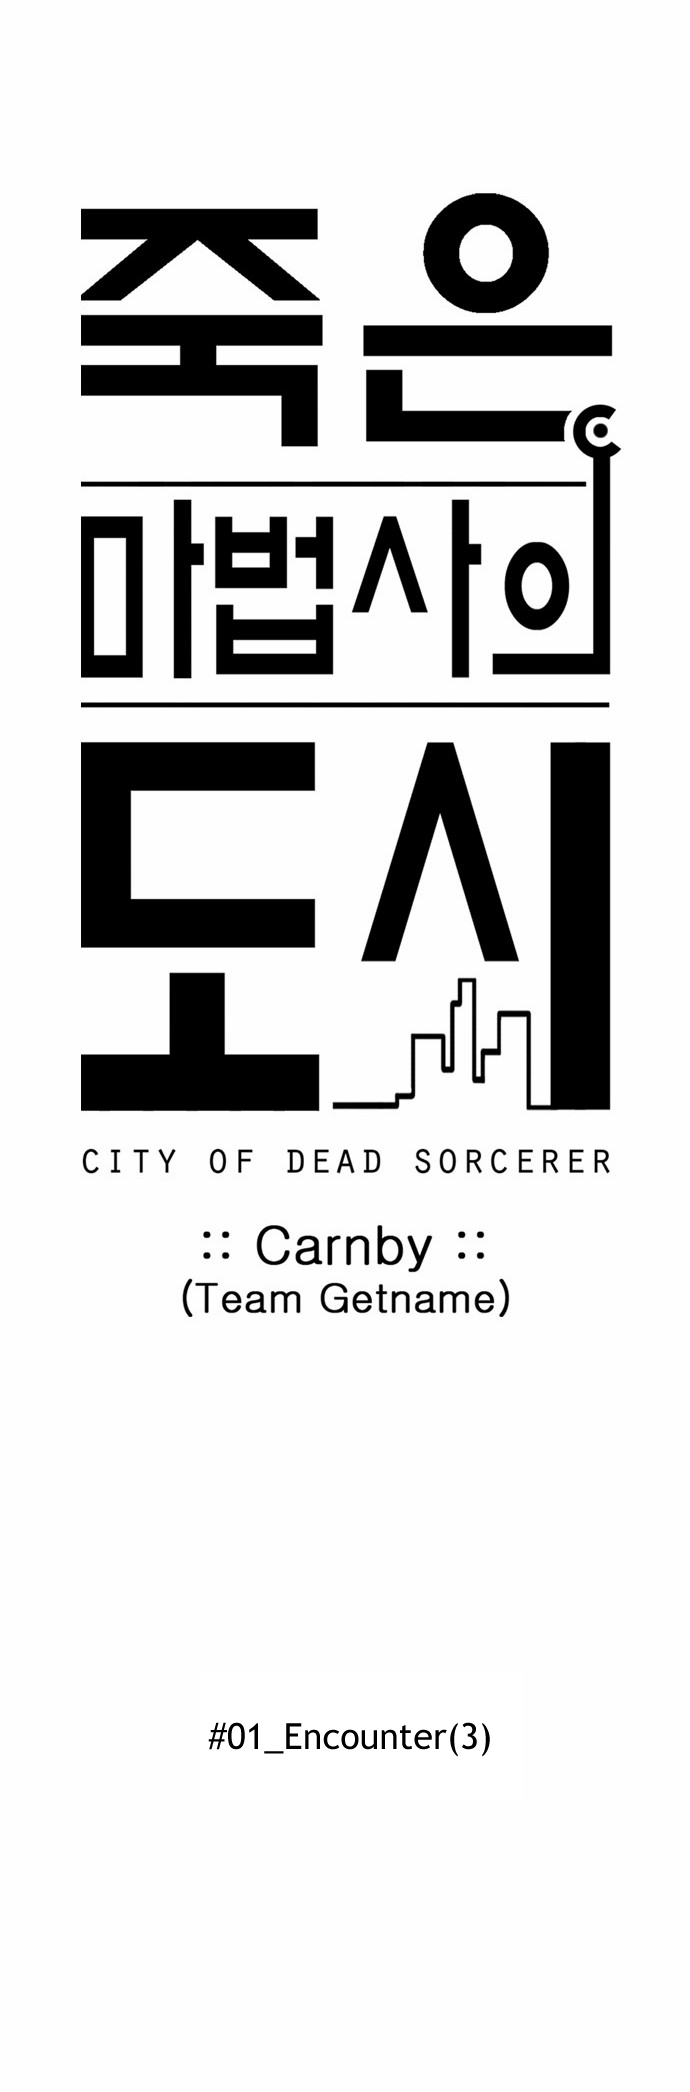 City of the Dead Sorcerer Ch. 3 Encounter (3)